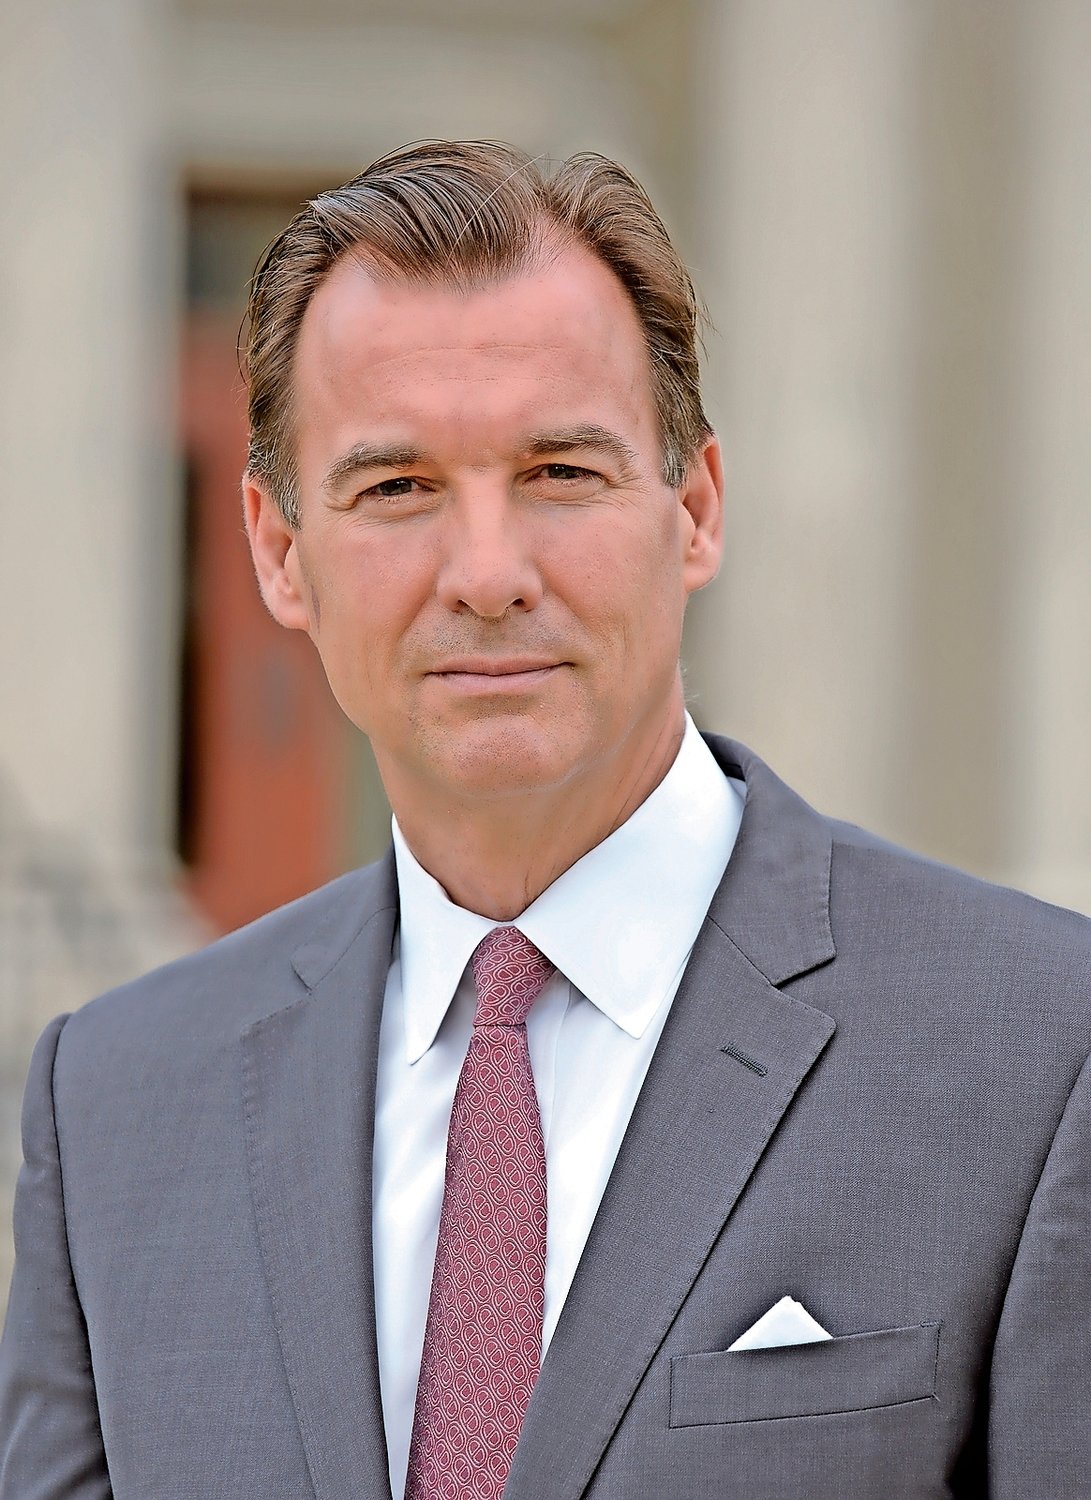 U.S. Rep. Tom Suozzi, a former Glen Cove mayor and Nassau County executive, is running for governor.